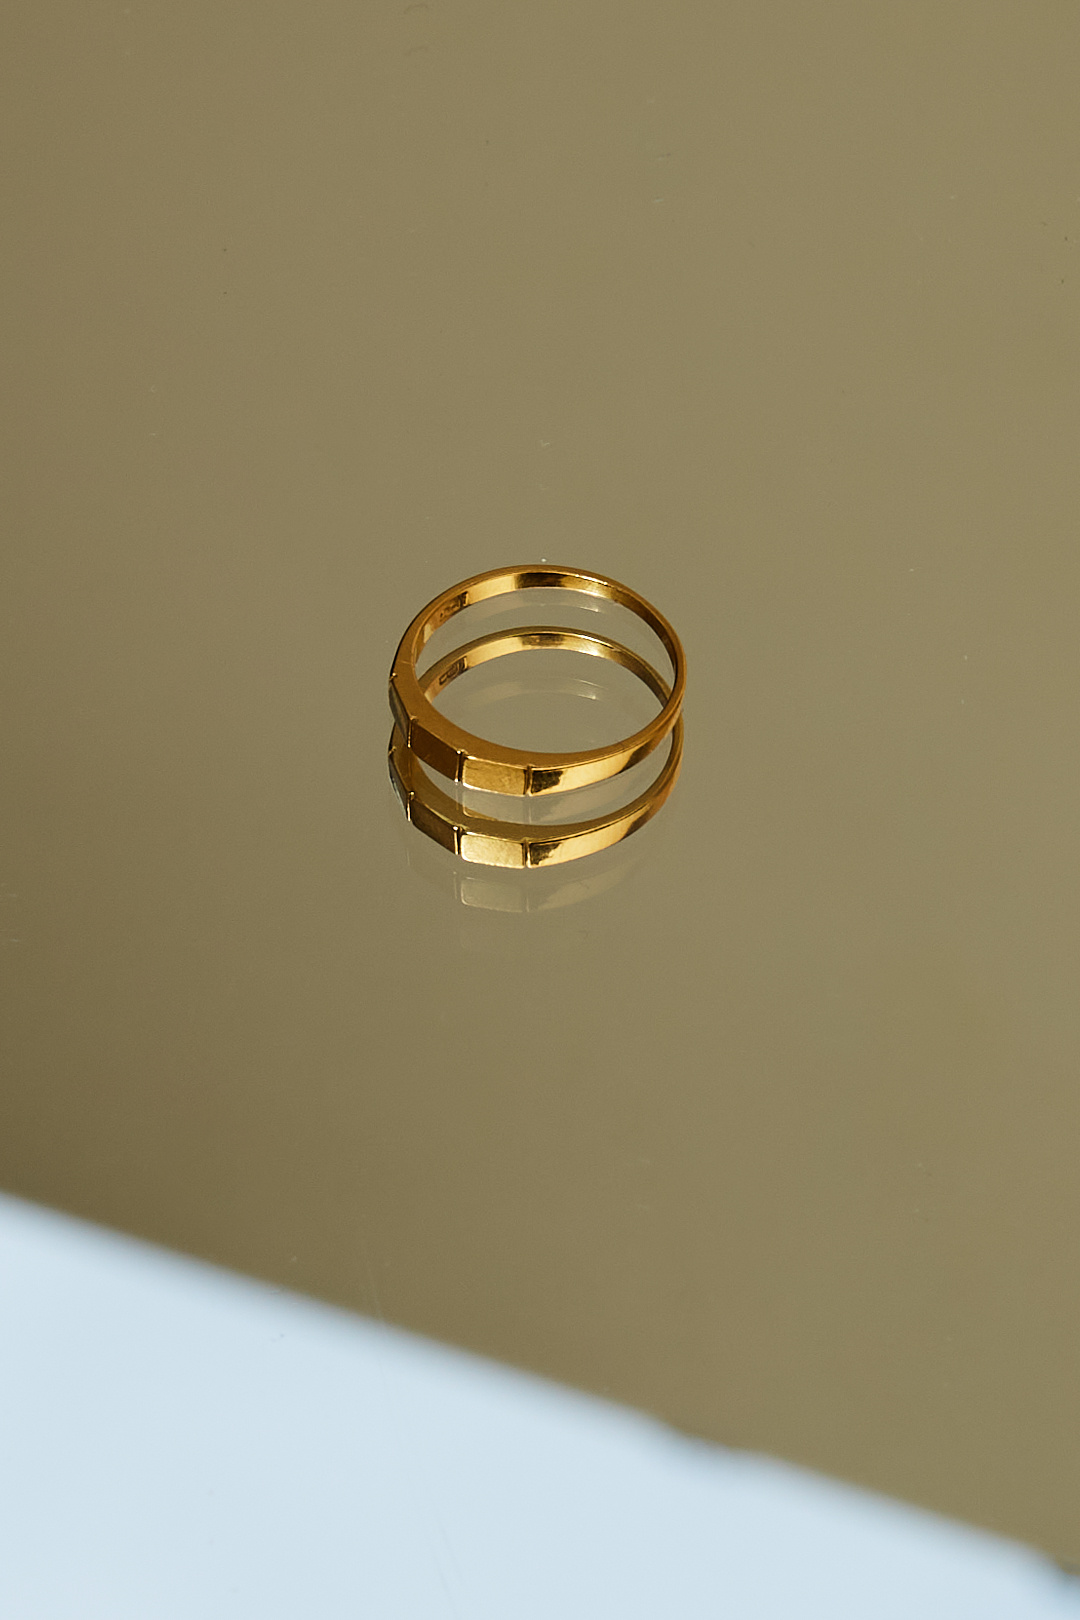 The Boyscouts - apex ring gold/17mm